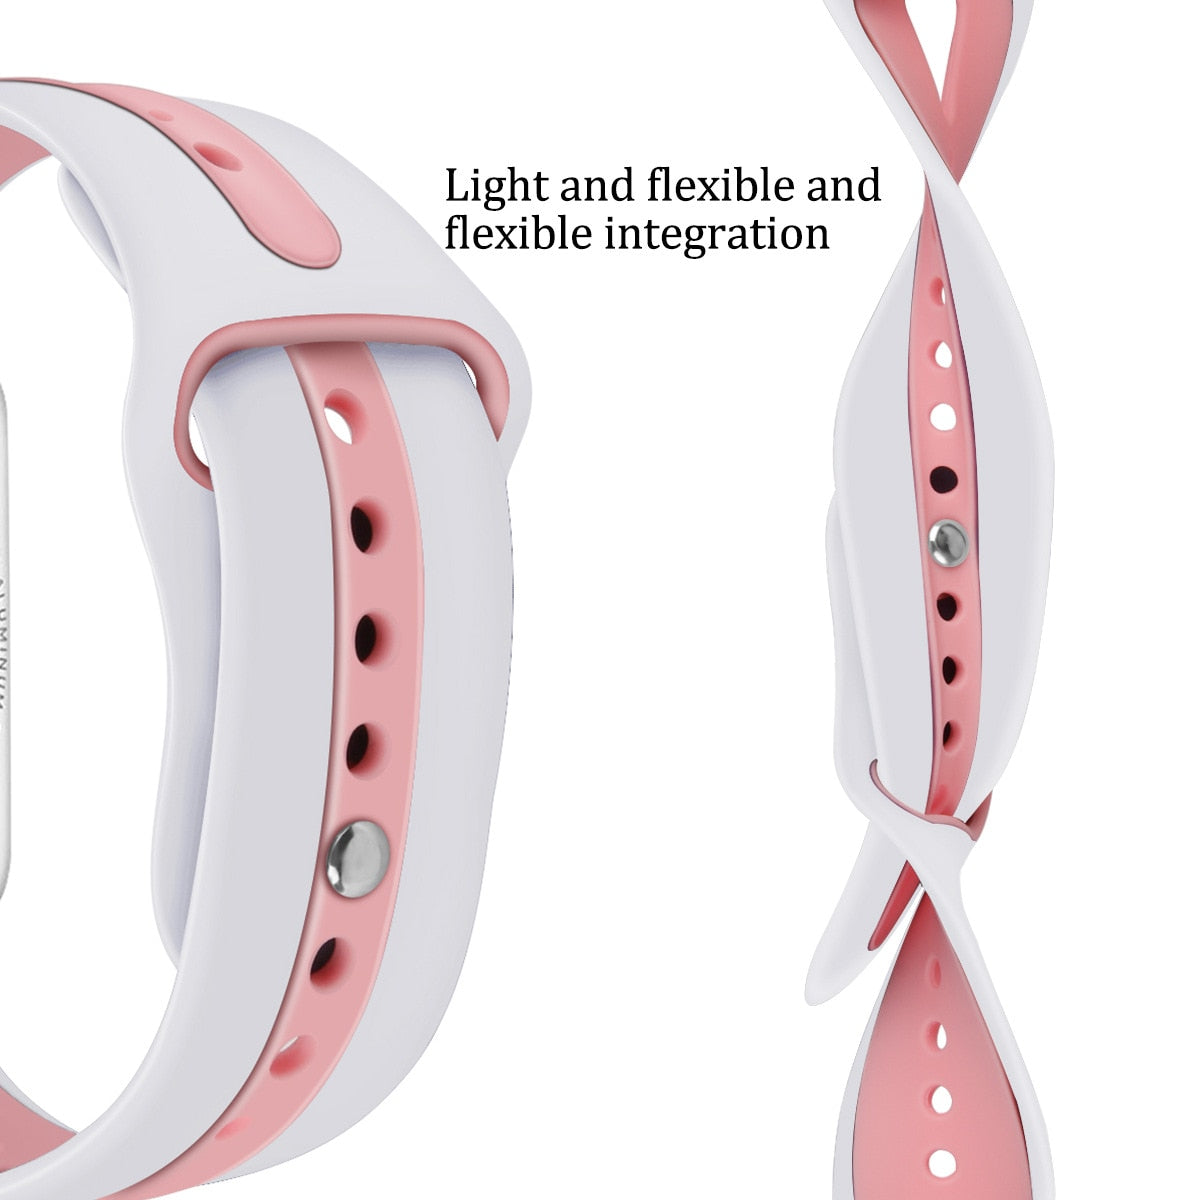 Hole Silicone Strap For Apple Watch - Wristwatchstraps.co